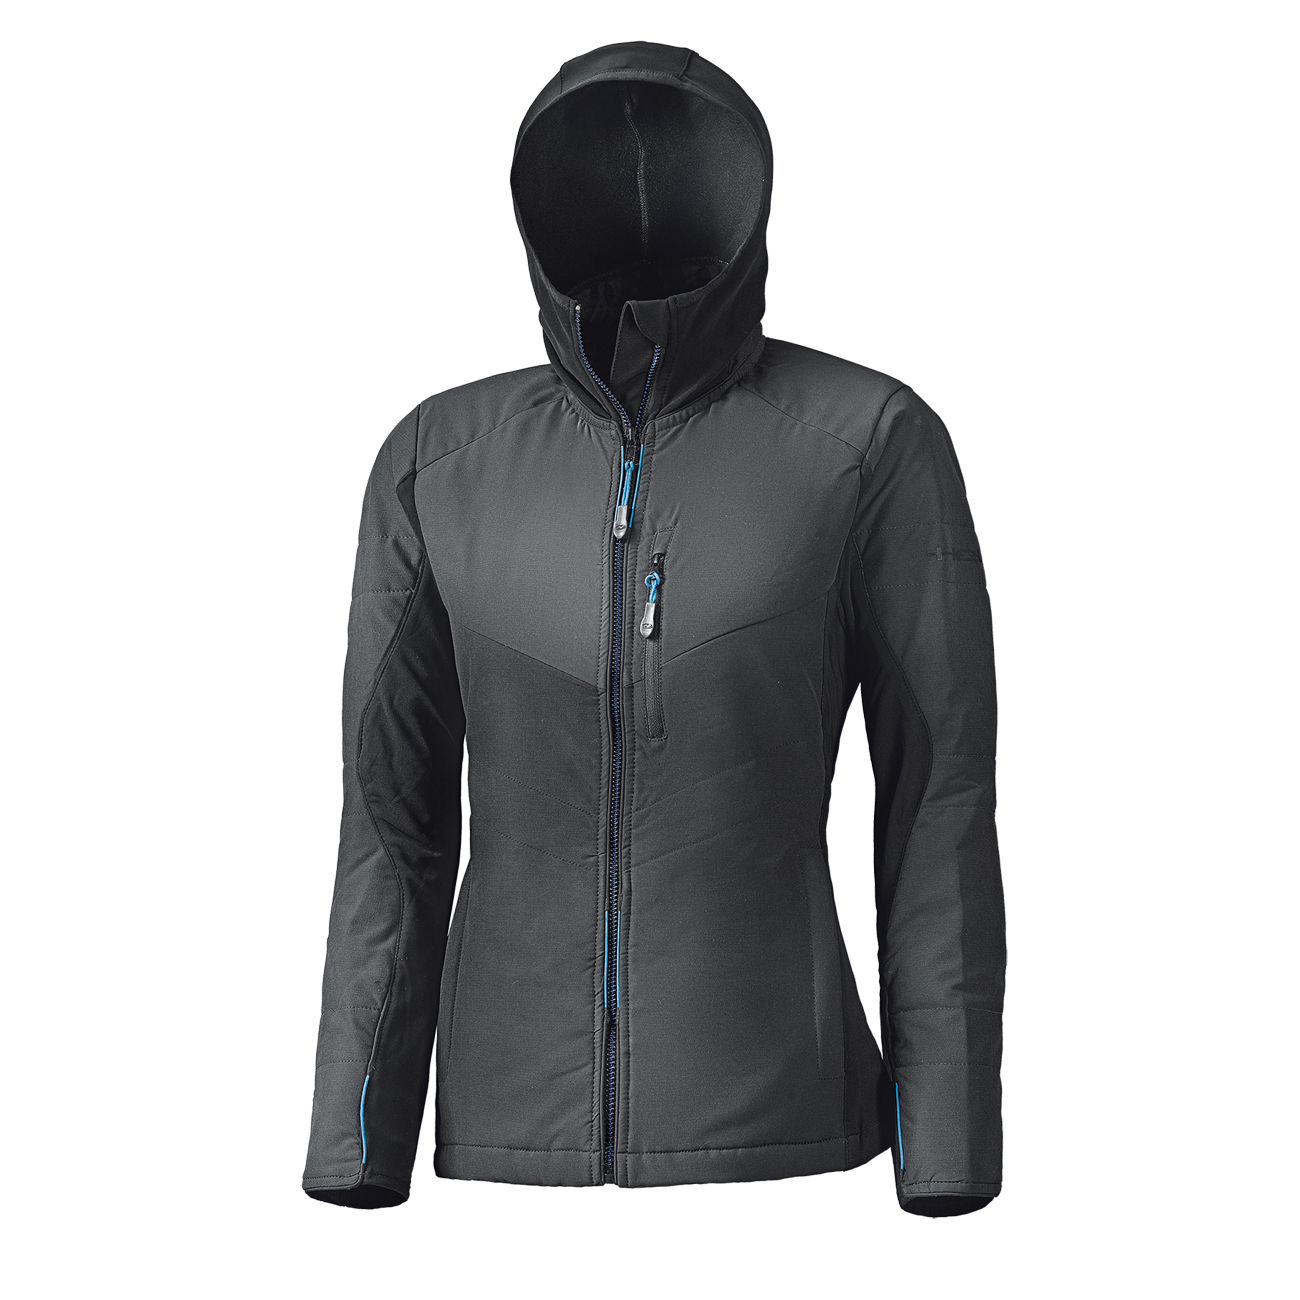 Clip-in Thermo Top Jacket 